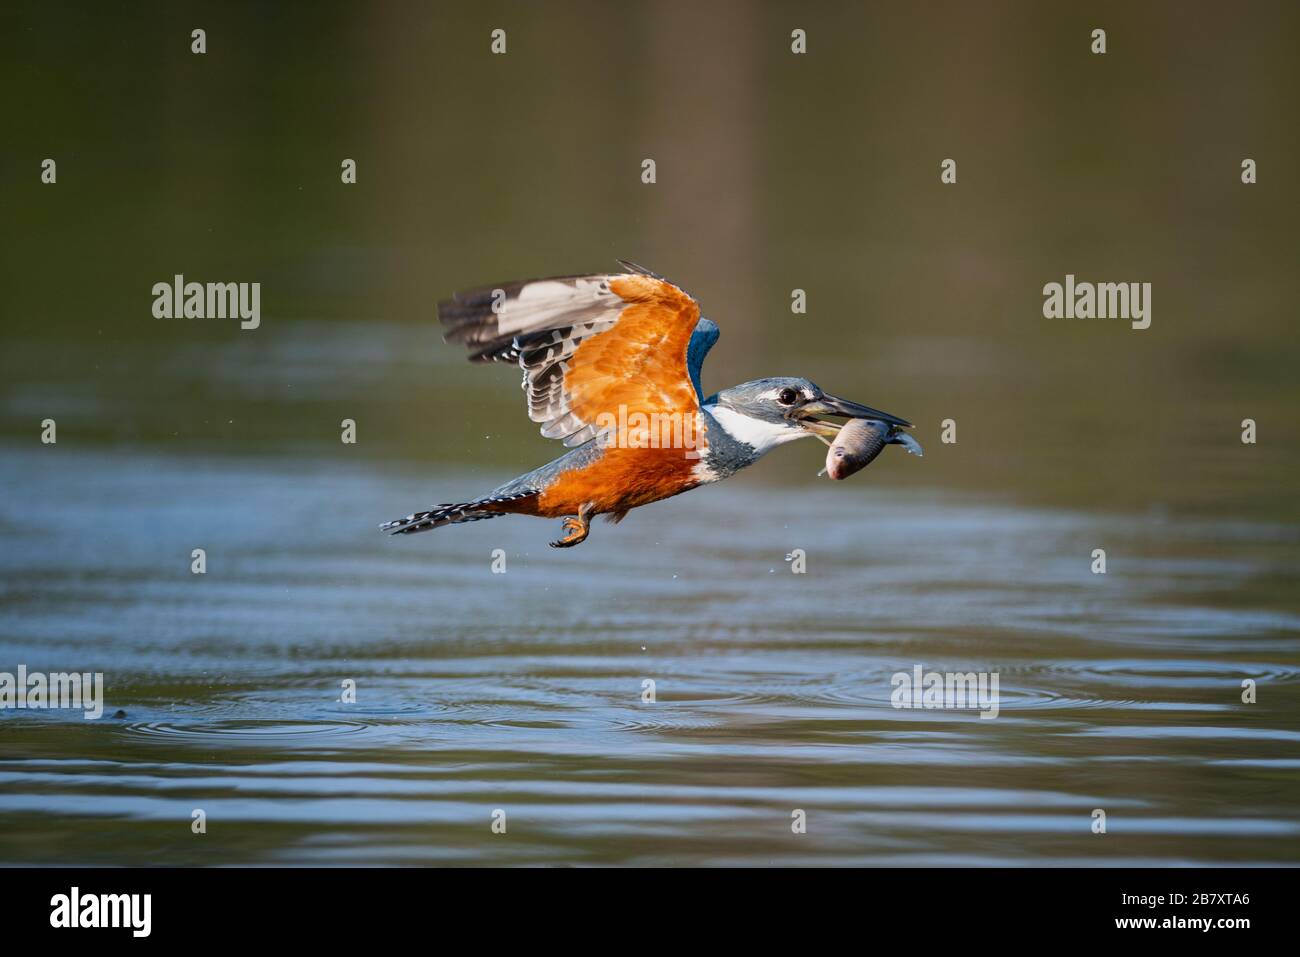 A Ringed Kingfisher (Megaceryle torquata) catching a small fish in North Pantanal, Brazil. Stock Photo